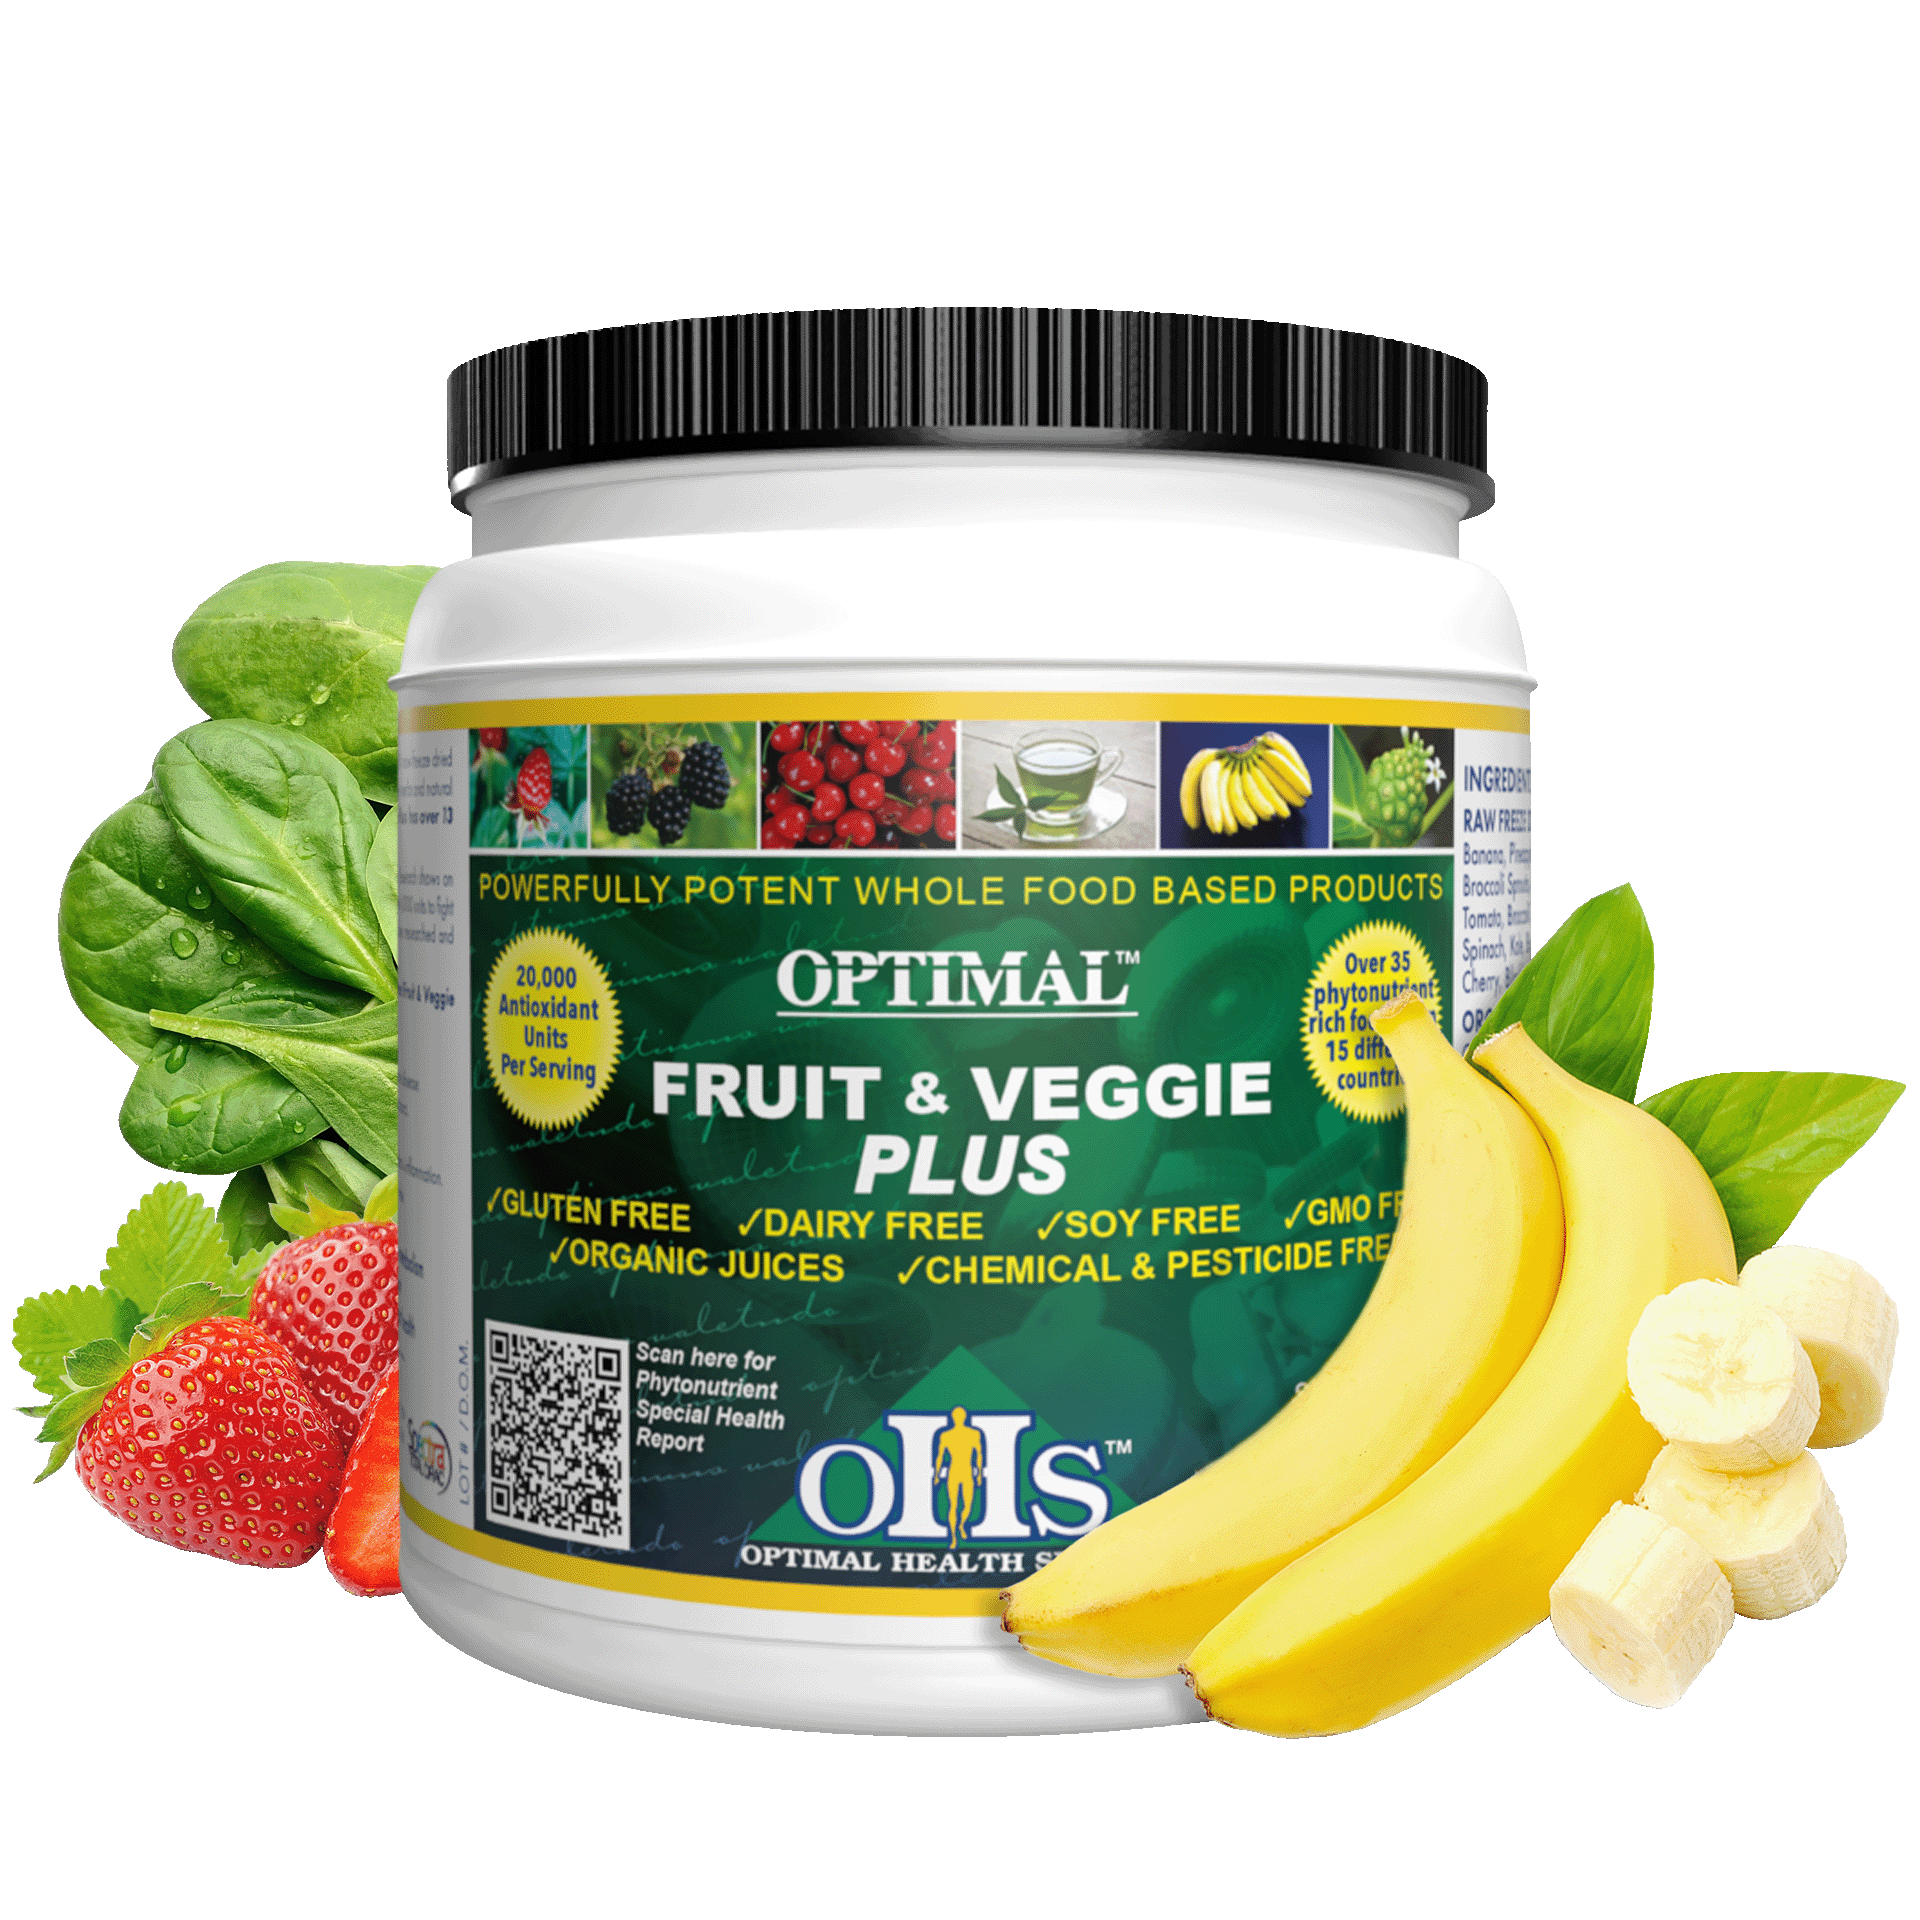 Image of a bottle of Optimal Fruit and Veggie Plus. Around the bottle are bananas, strawberries, and spinach.